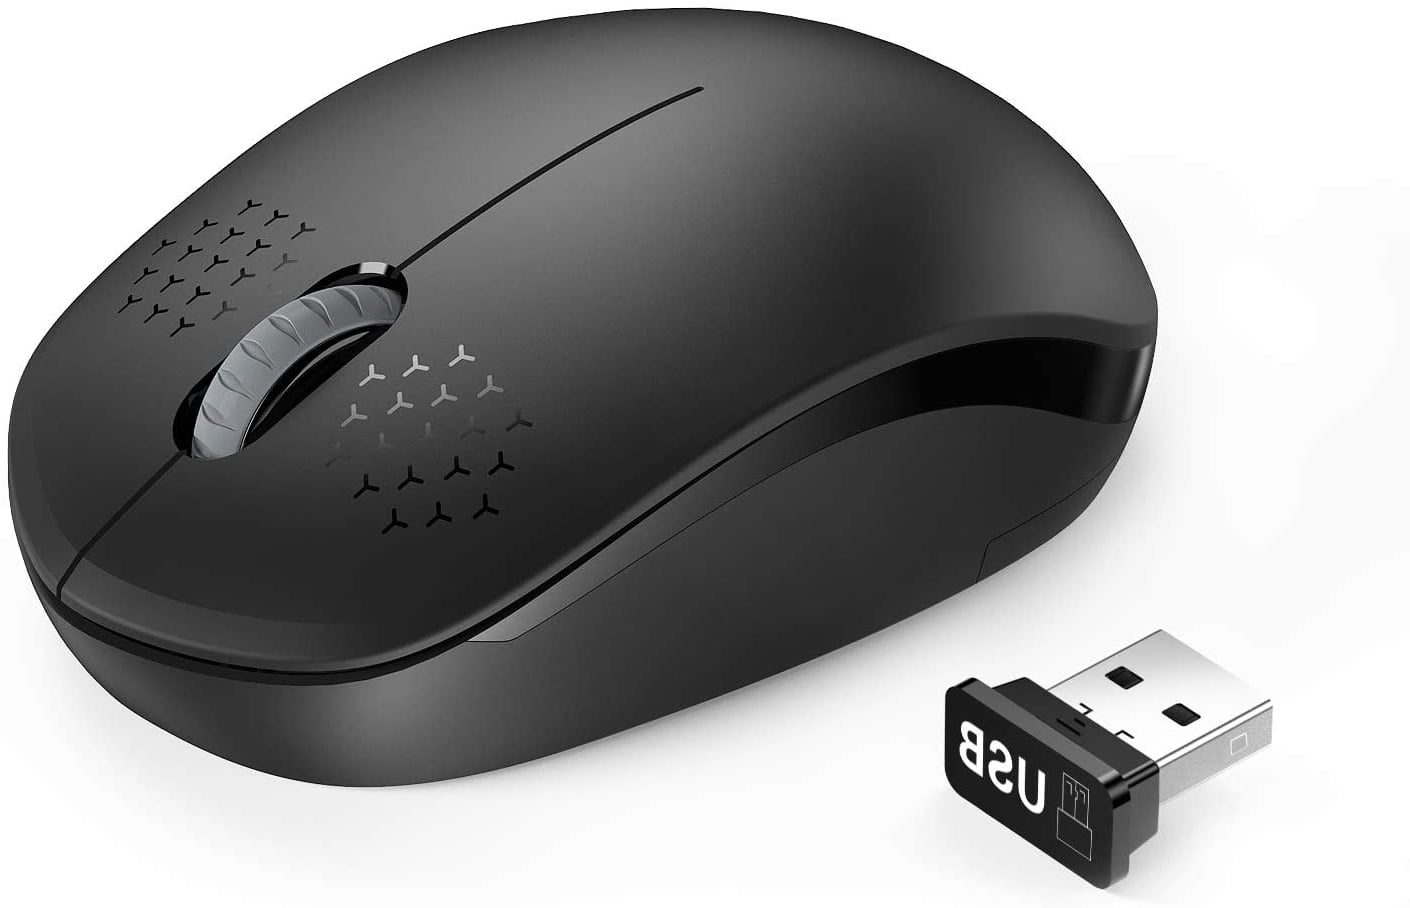 Verloren organiseren Verandering Wireless Mouse - 2.4G Cordless Mice with USB Nano Receiver Computer Mouse  with Noiseless Click for Laptop, PC, Tablet, Computer, and Mac - Black -  Walmart.com